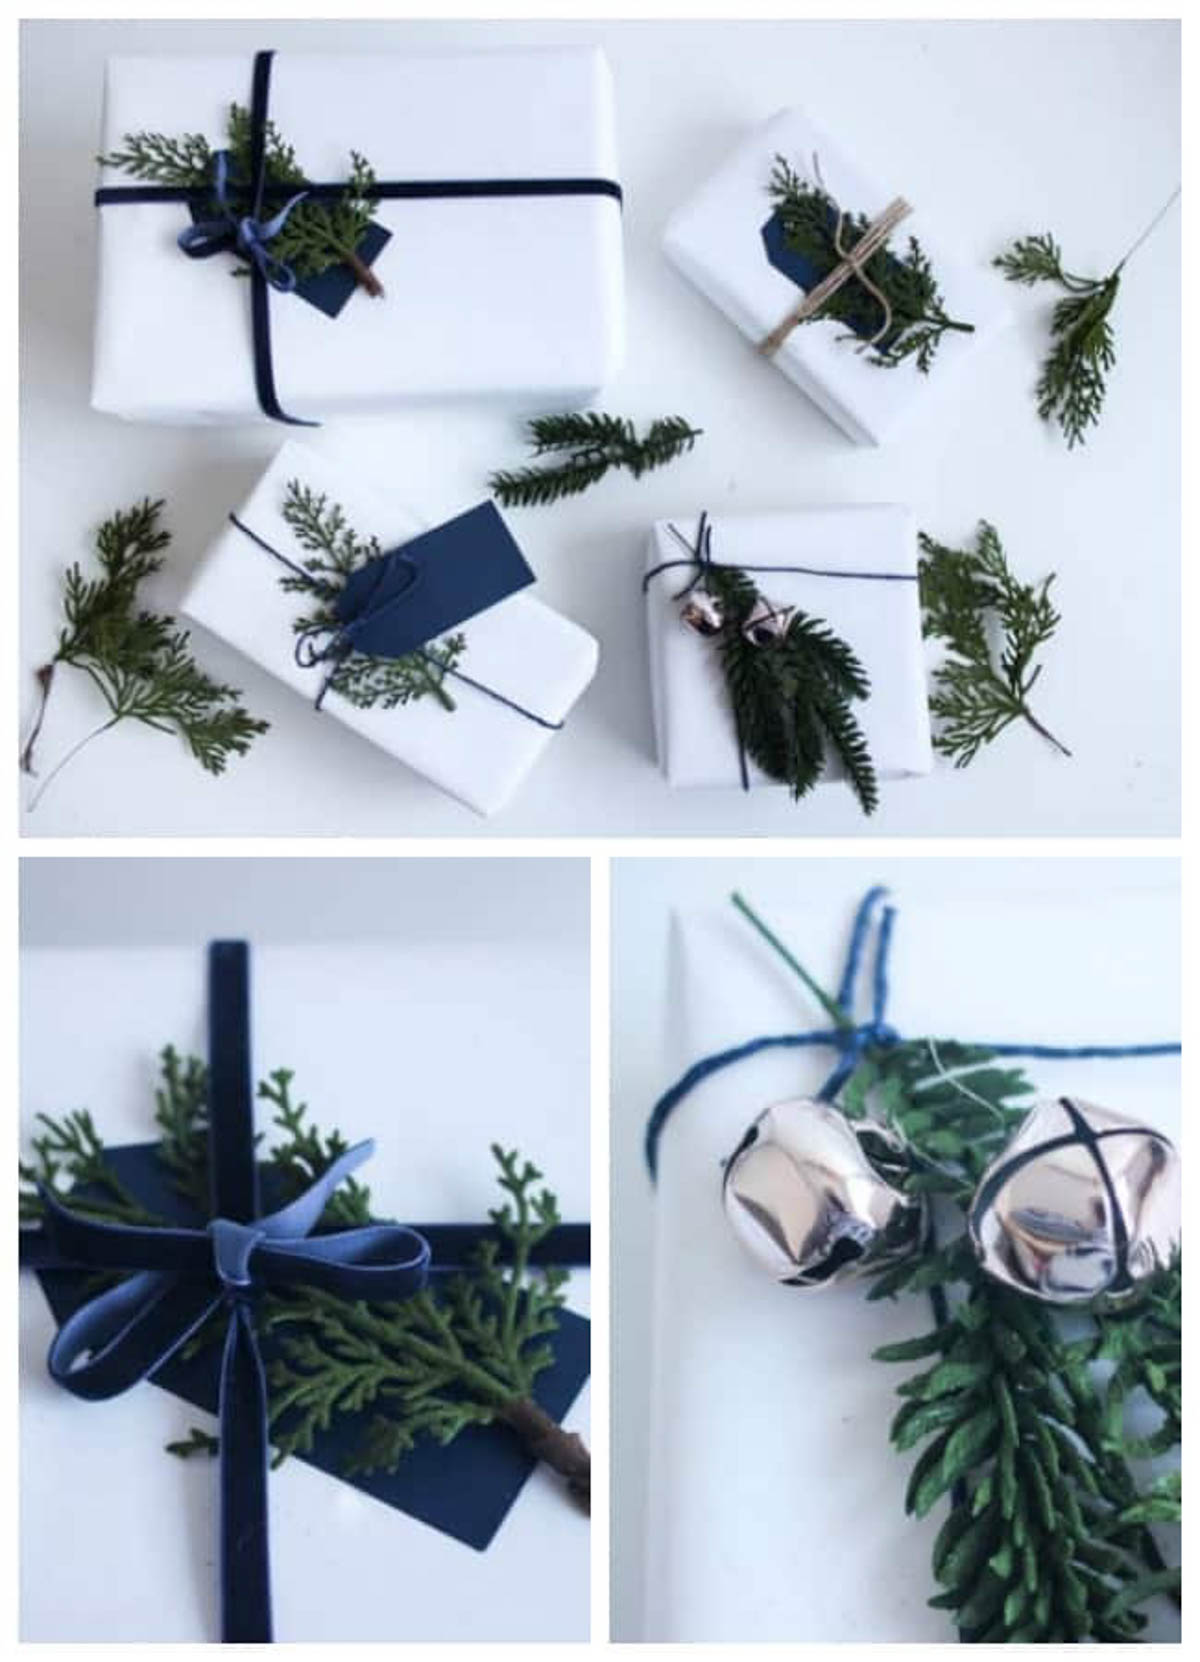 Image collage of DIY gift wrap ideas.